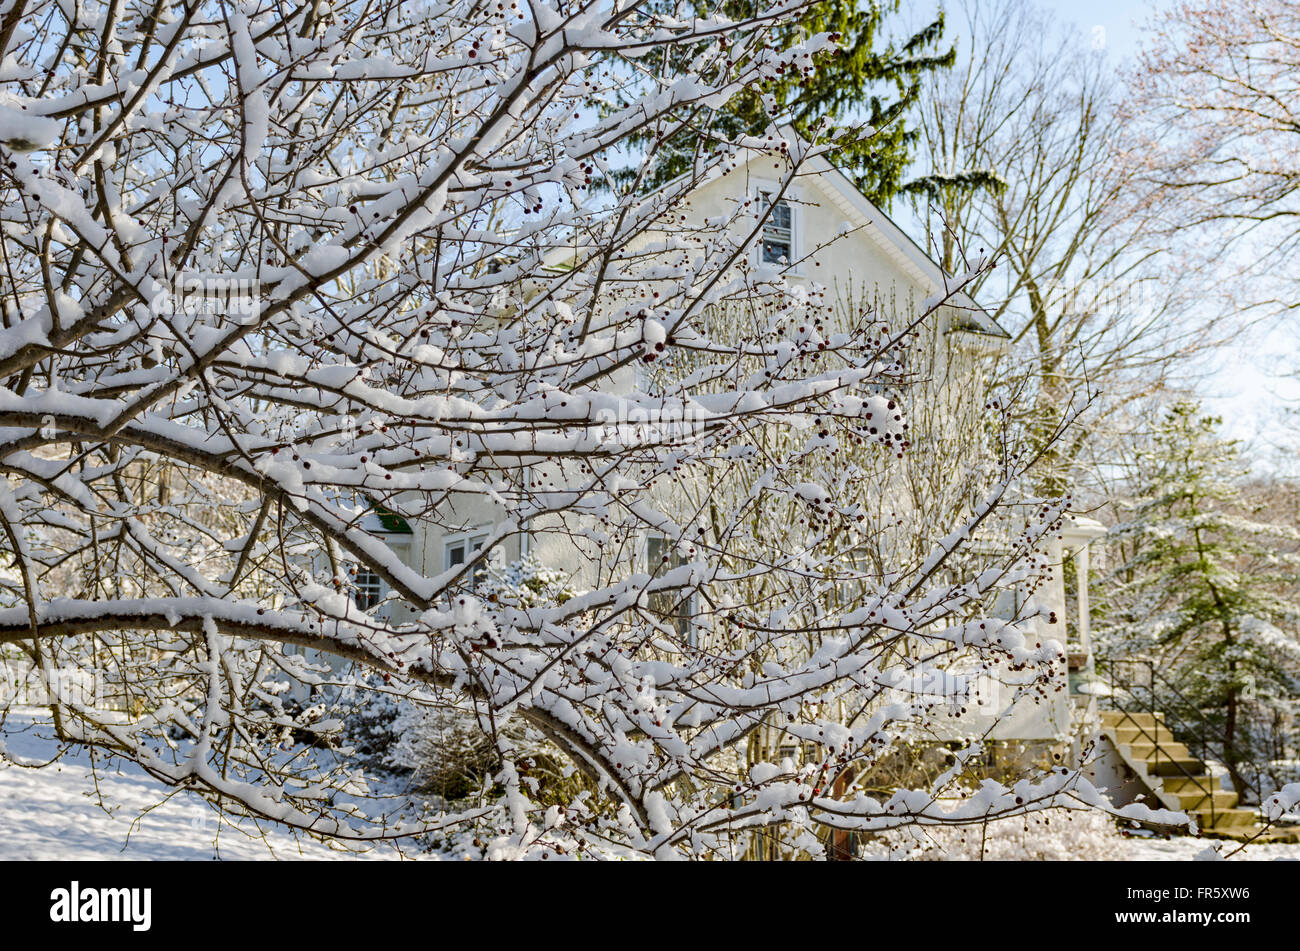 Chappaqua, New York, USA. 21st March, 2016. A snowstorm that hit the Northeastern United States on the first day of Spring blankets a backyard  in suburban Westchester County, covering trees and plants already starting to bud after a warm winter. Marianne A. Campolongo/Alamy Live News. Stock Photo